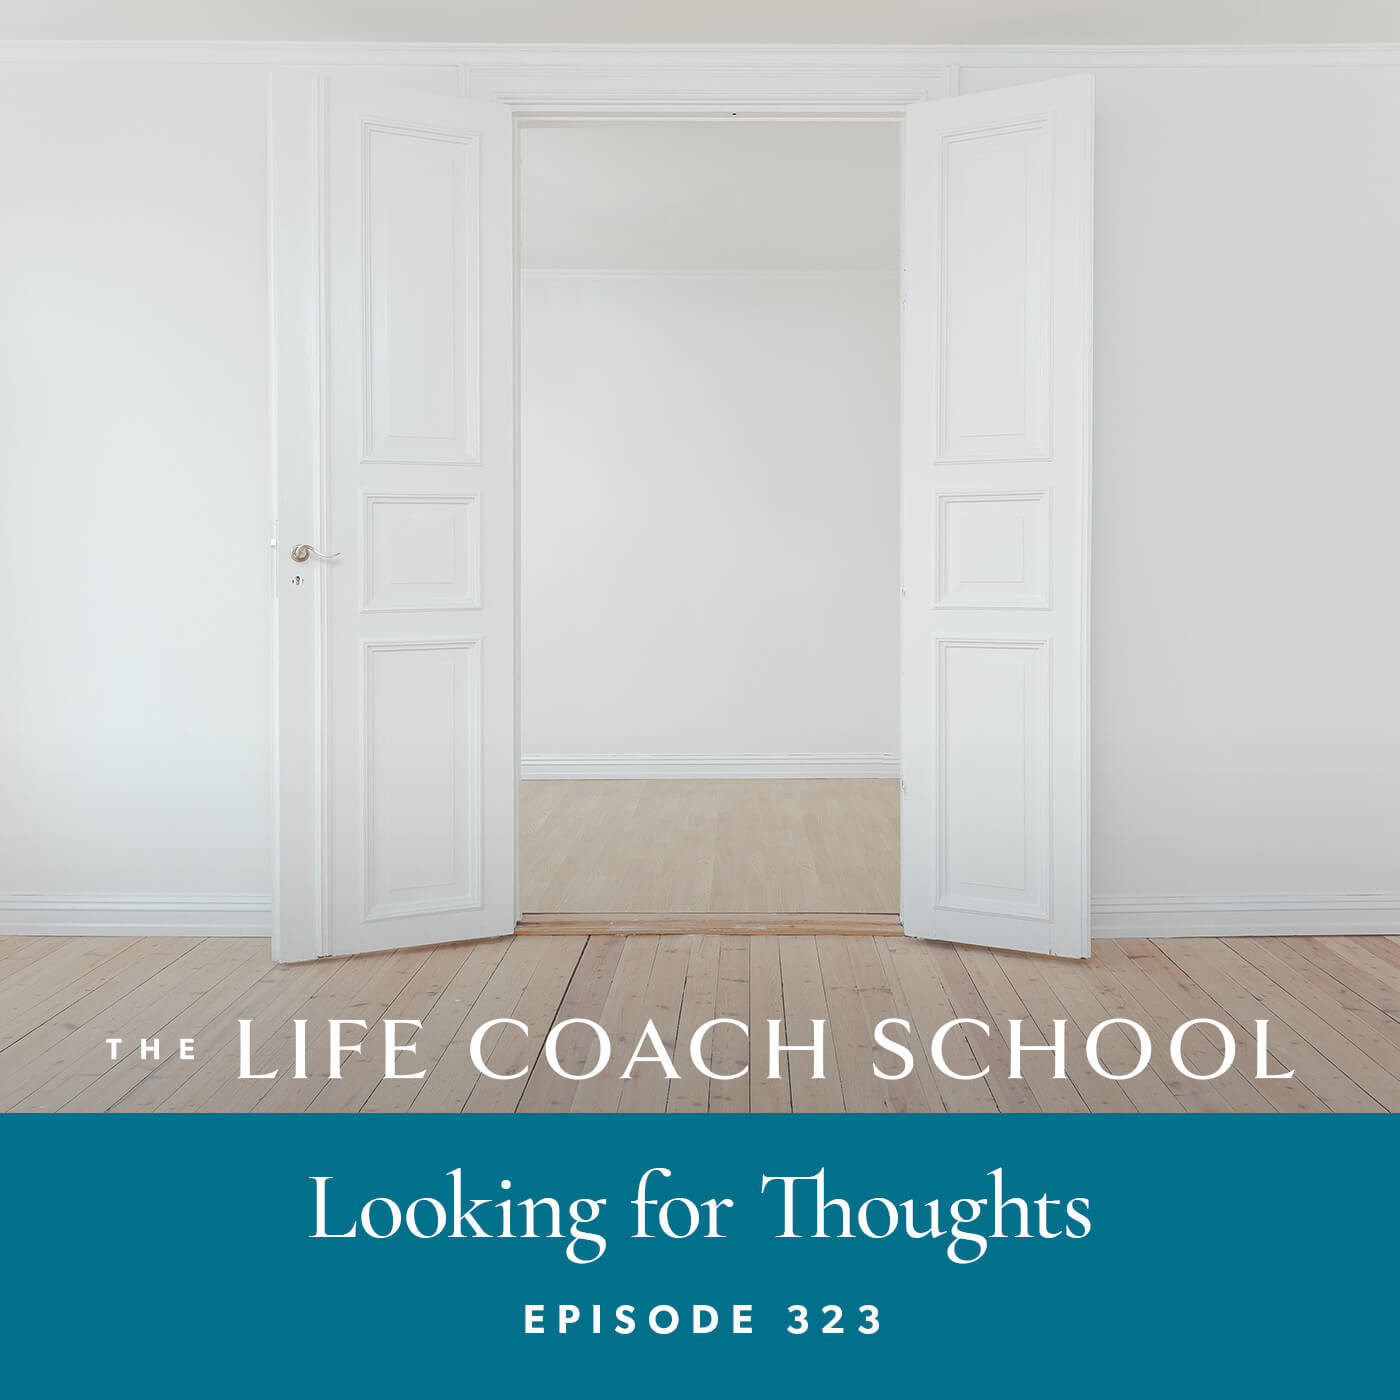 The Life Coach School Podcast with Brooke Castillo | Episode 323 | Looking for Thoughts